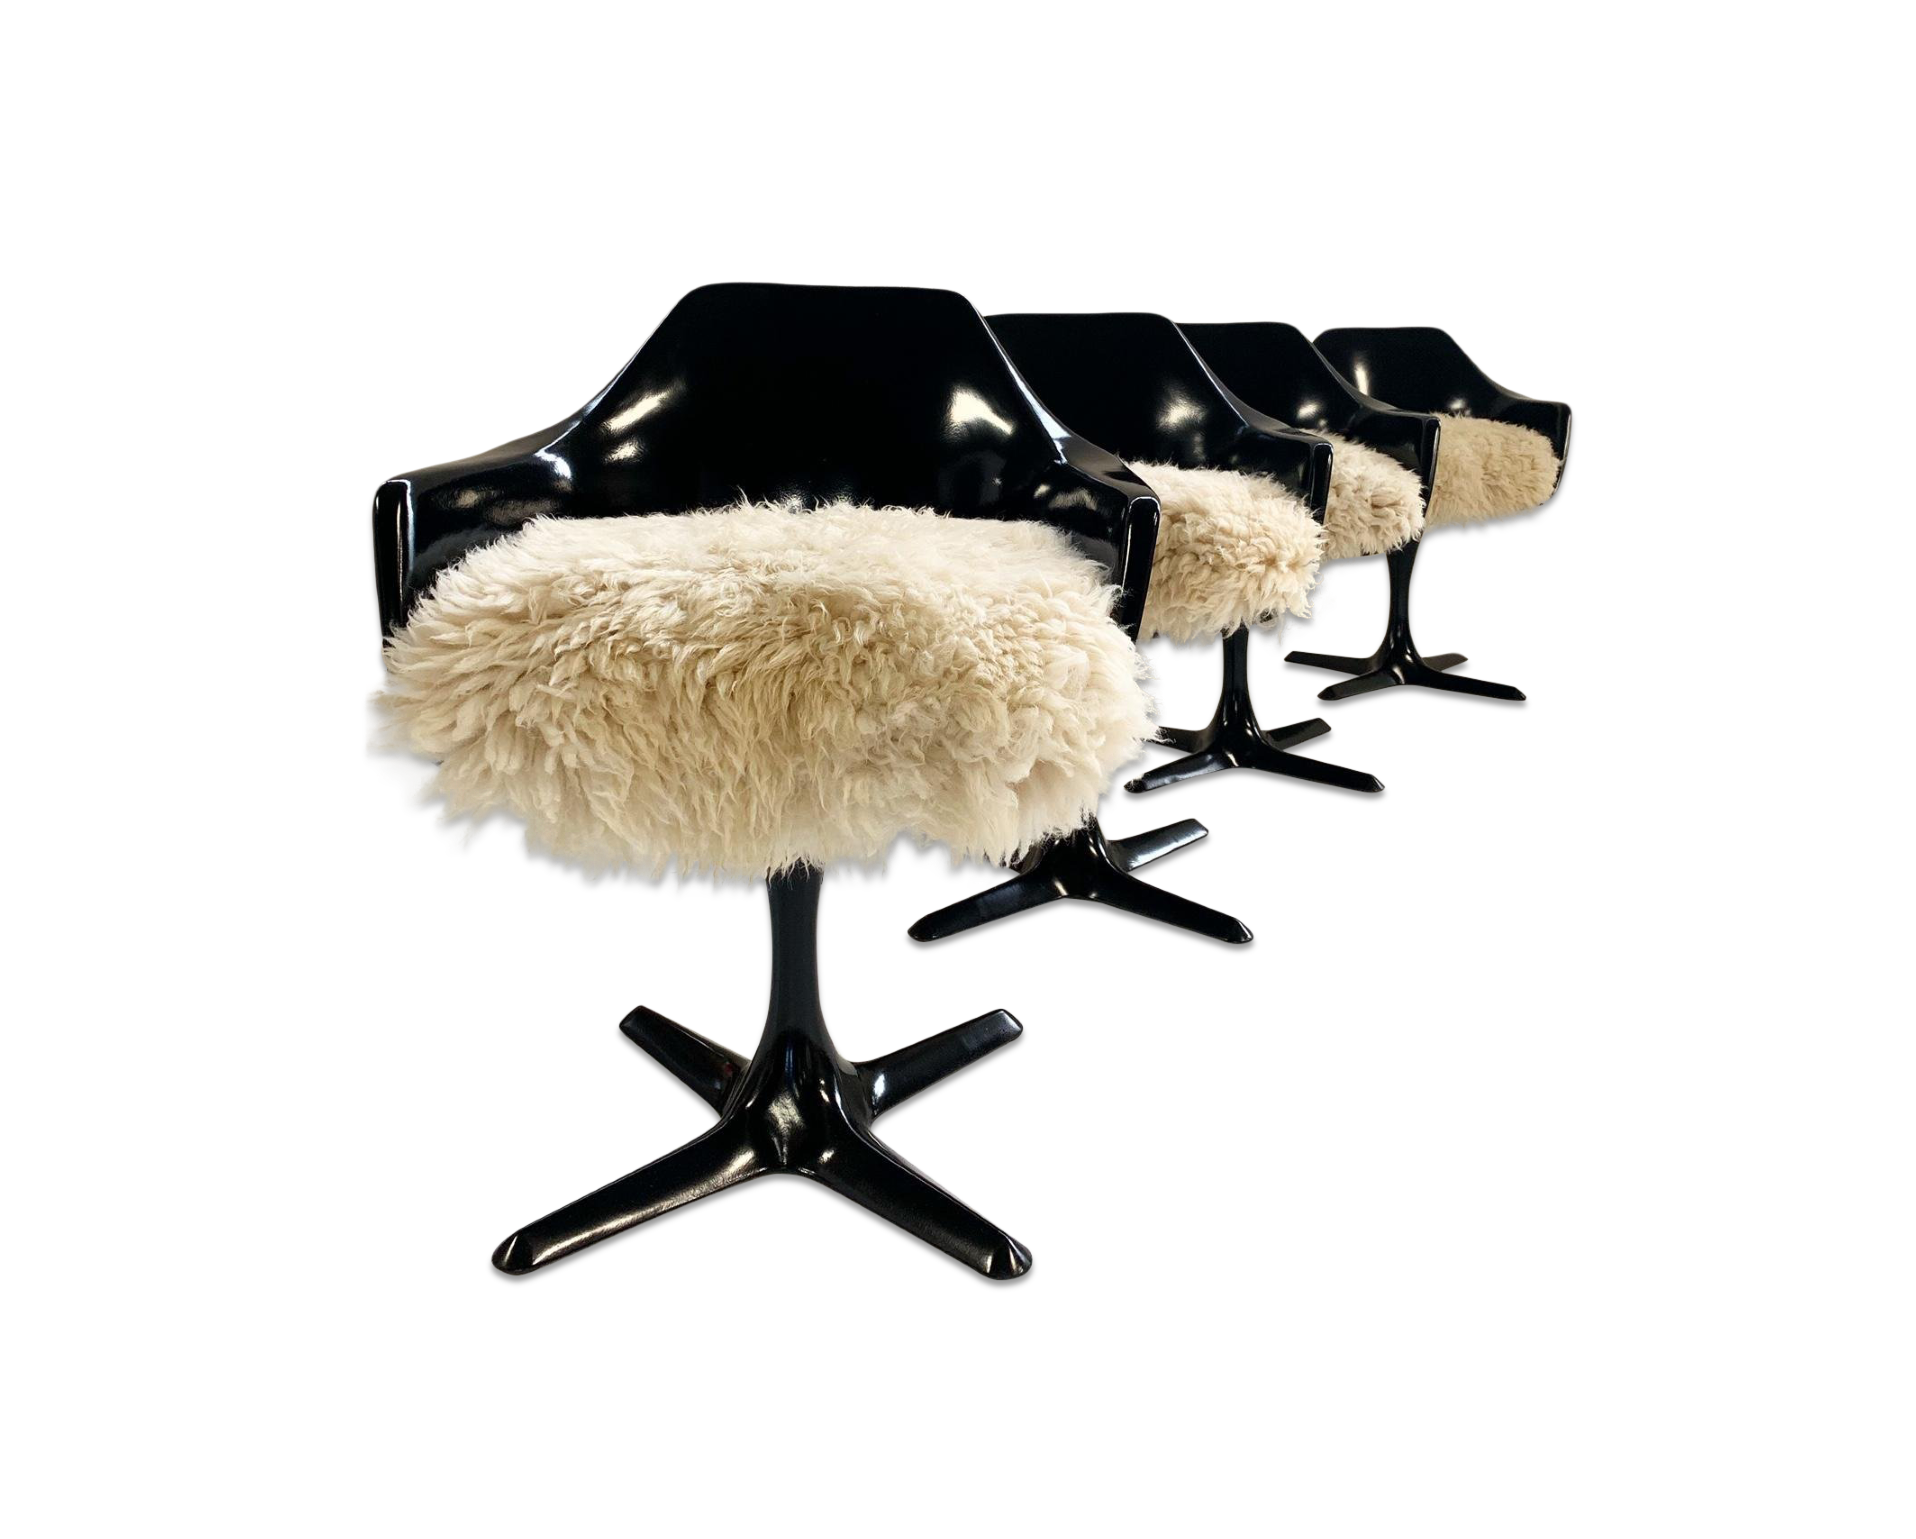 Tulip Armchairs with California Sheepskin Cushions, set of 4 - FORSYTH